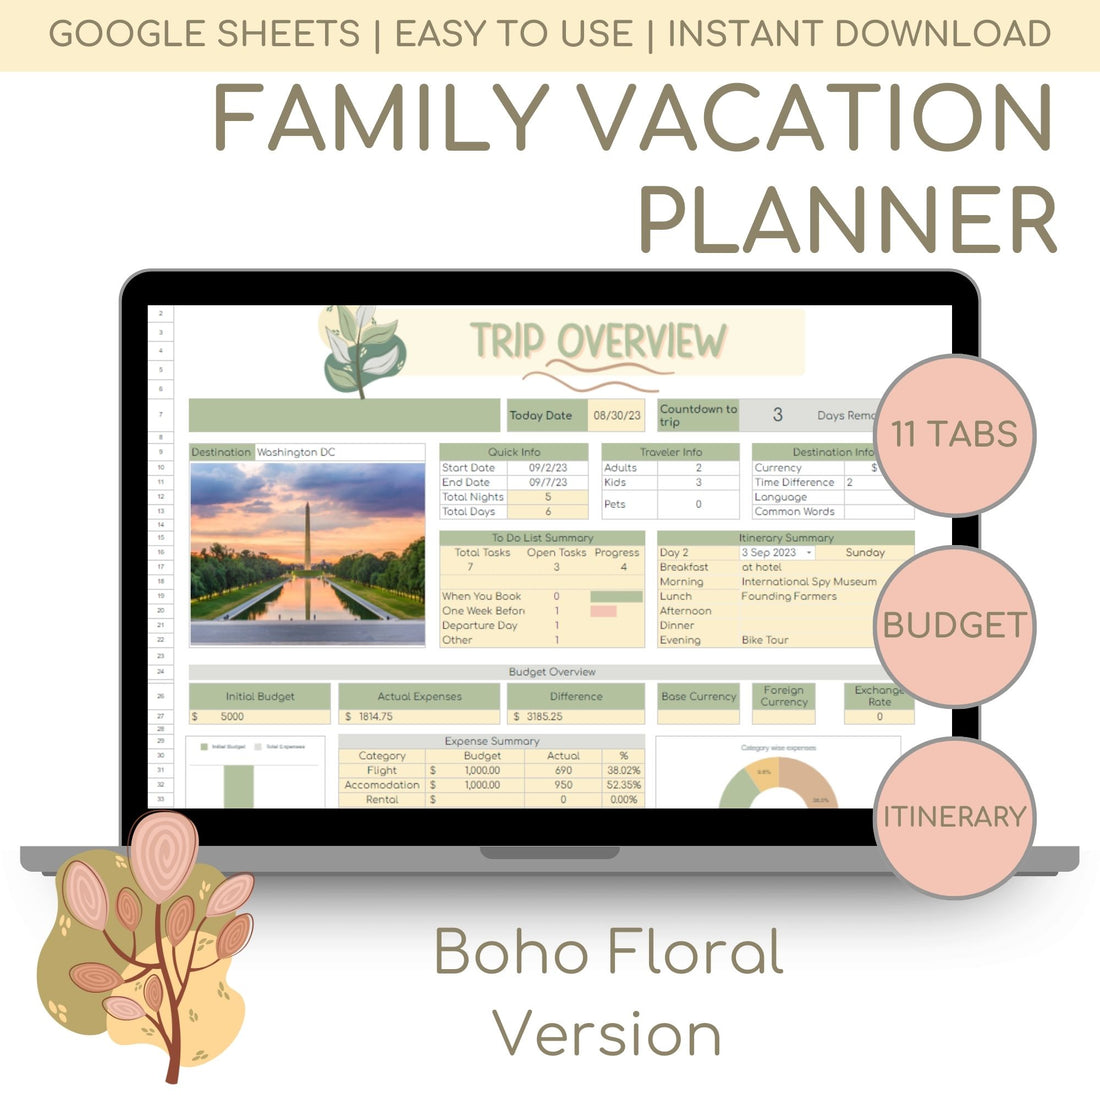 Family Vacatio Planners with Travel Itinerary Template for Google Sheets - Boho Floral